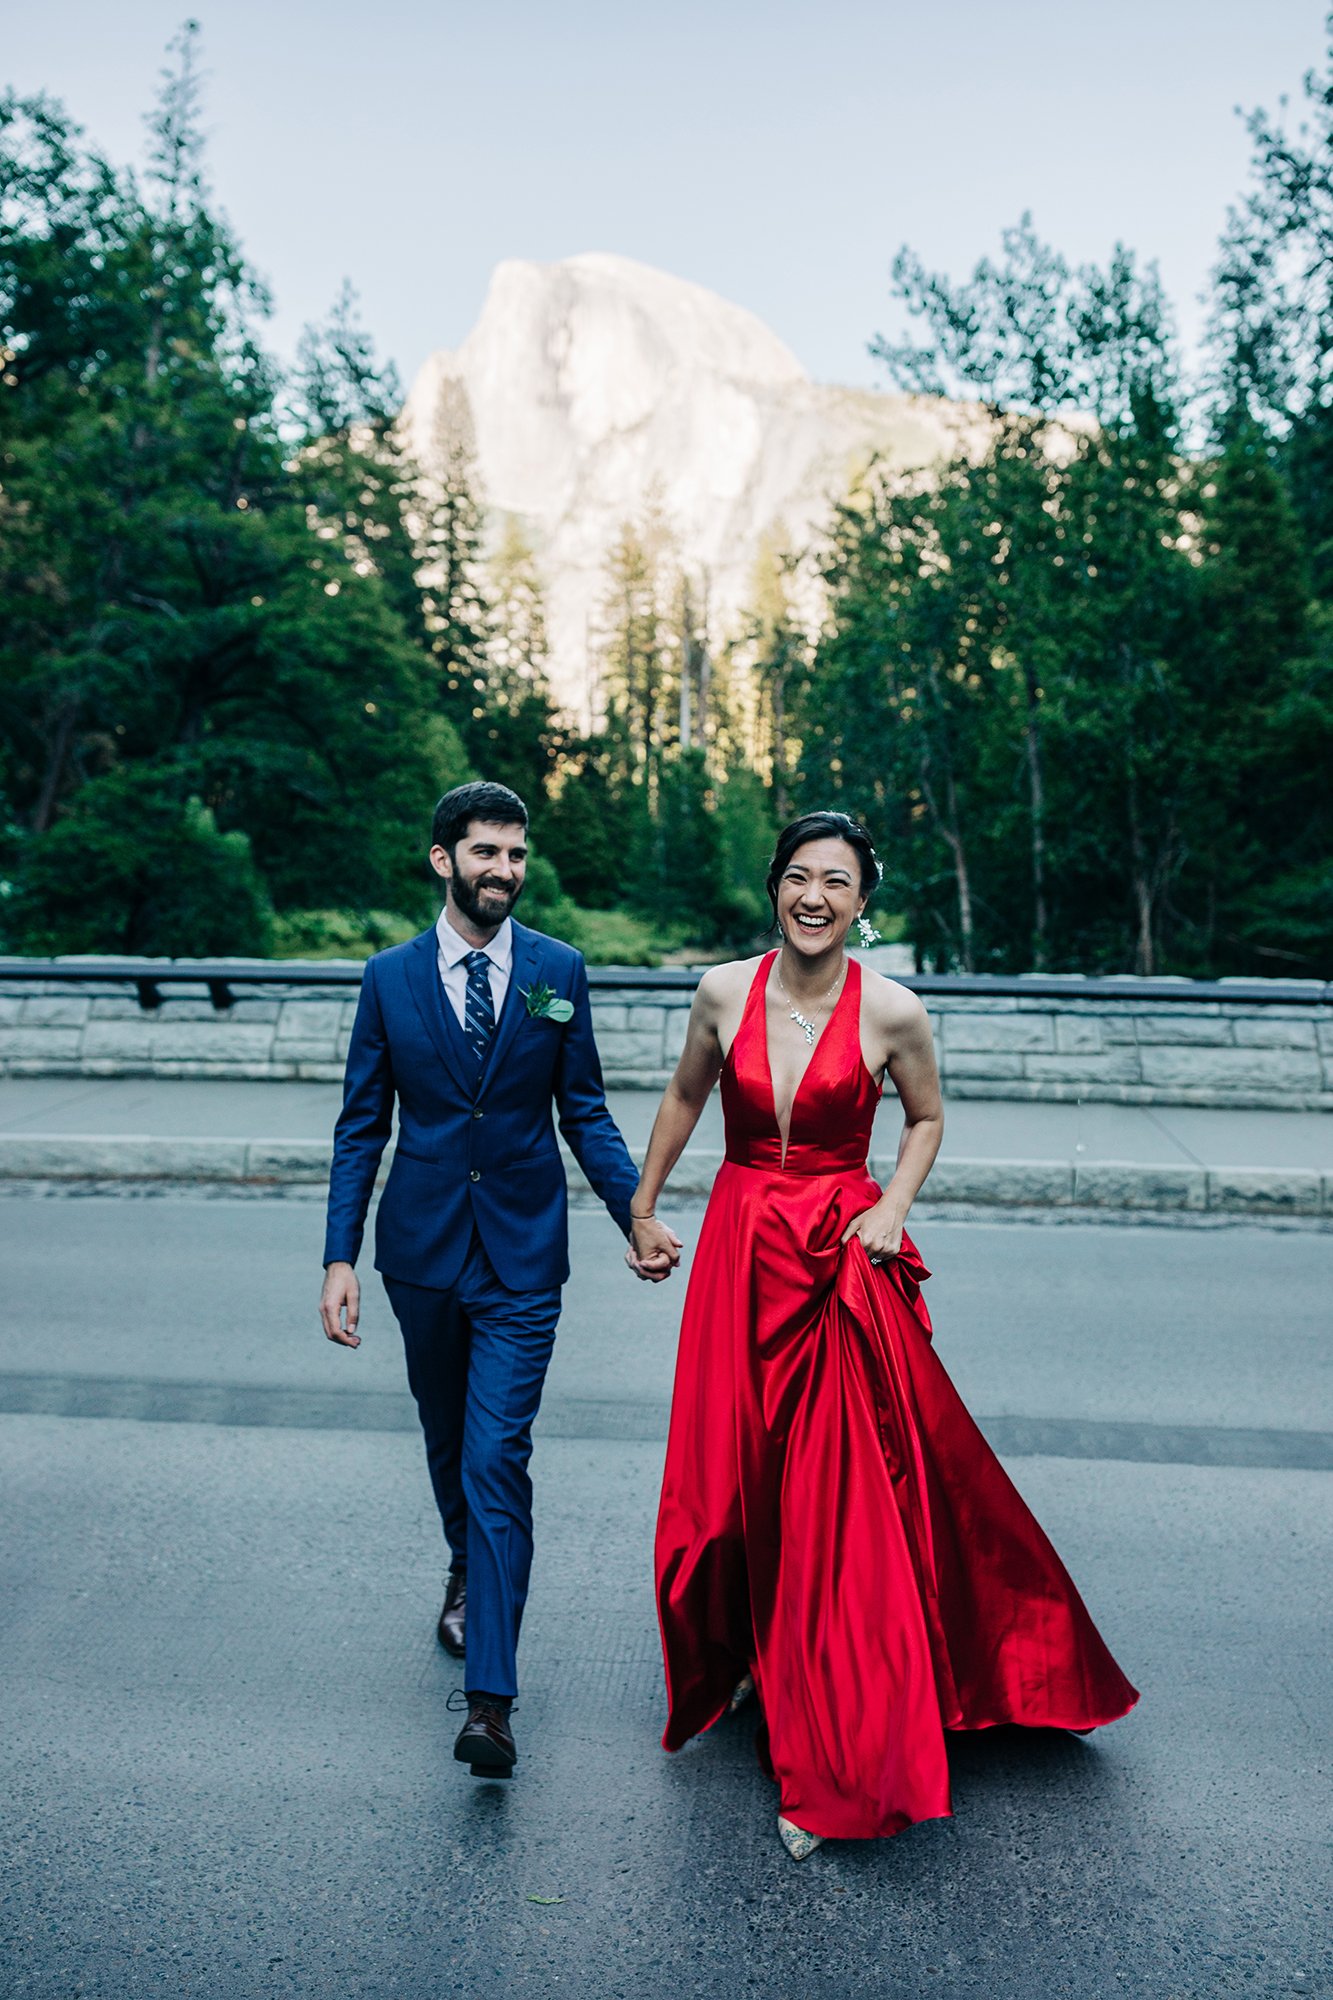 Yooree and Jarrod cross the street during their elopement in Yosemite National Park.